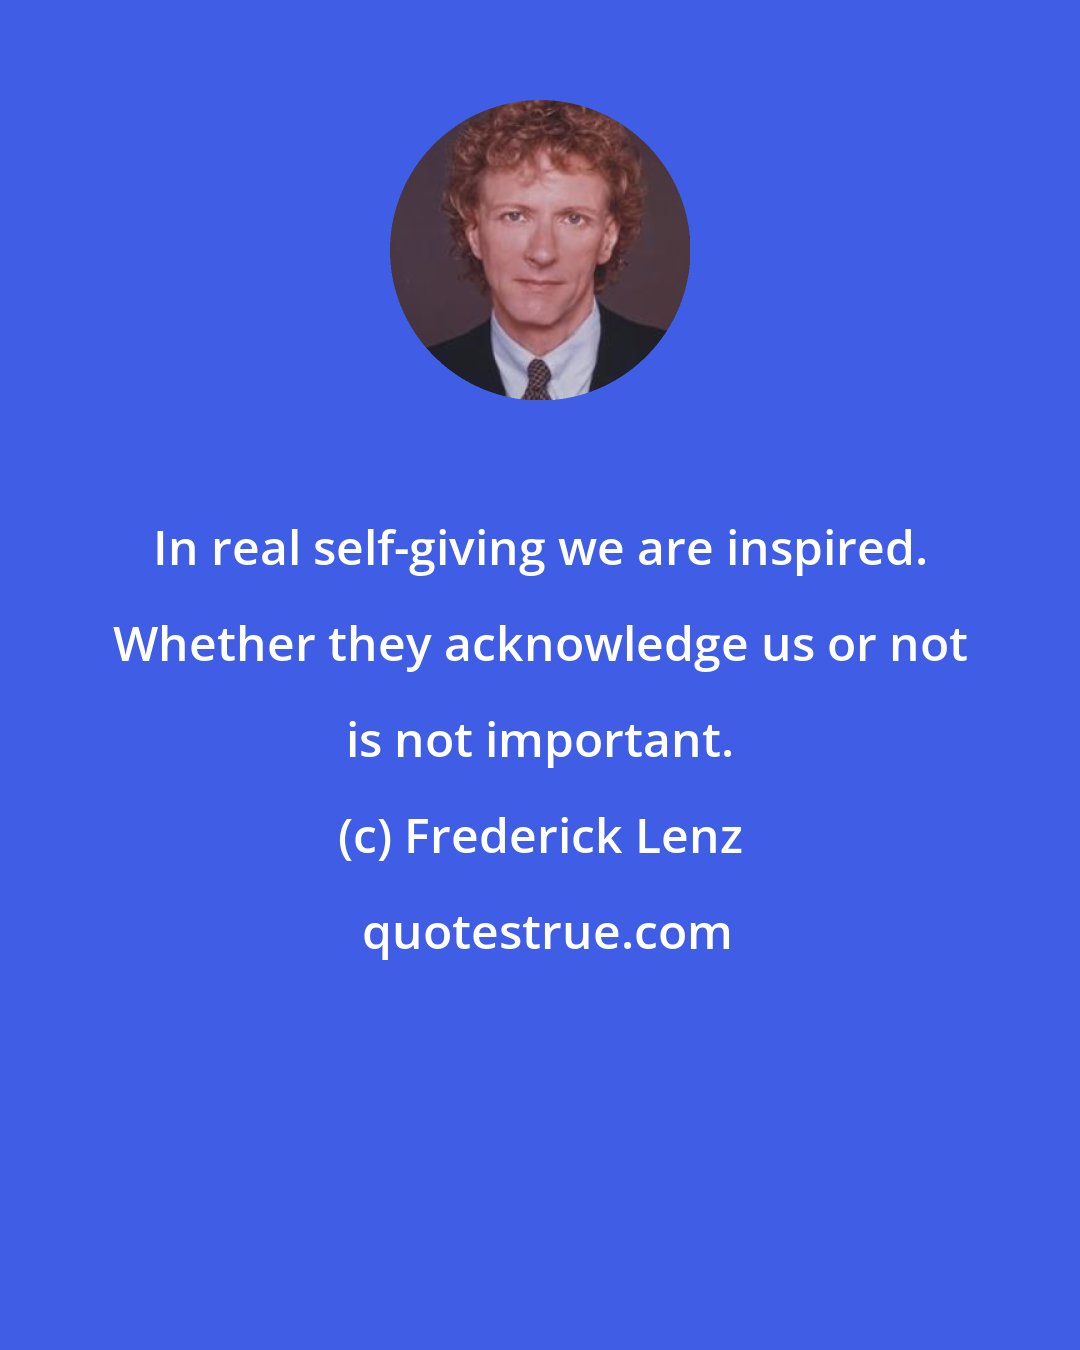 Frederick Lenz: In real self-giving we are inspired. Whether they acknowledge us or not is not important.